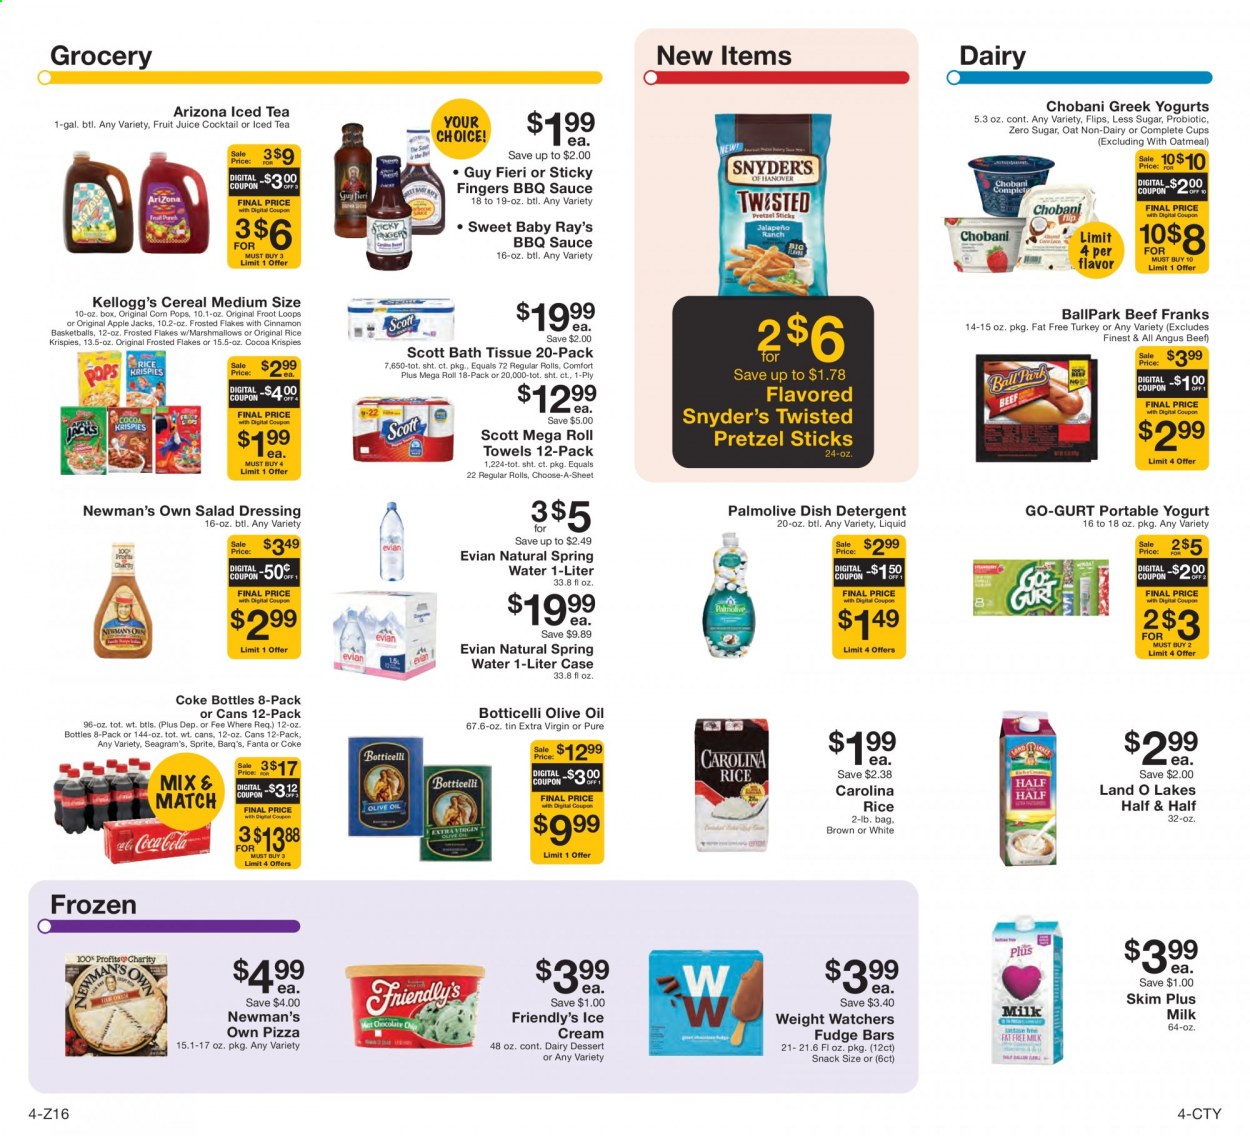 thumbnail - Fairway Market Flyer - 07/09/2021 - 07/15/2021 - Sales products - pretzels, pizza, sauce, yoghurt, Chobani, milk, ice cream, Friendly's Ice Cream, fudge, marshmallows, snack, Kellogg's, cocoa, oatmeal, oats, cereals, Rice Krispies, Frosted Flakes, Corn Pops, BBQ sauce, salad dressing, dressing, extra virgin olive oil, olive oil, oil, Coca-Cola, Sprite, juice, fruit juice, Fanta, ice tea, AriZona, spring water, Evian, beef meat, Half and half. Page 4.